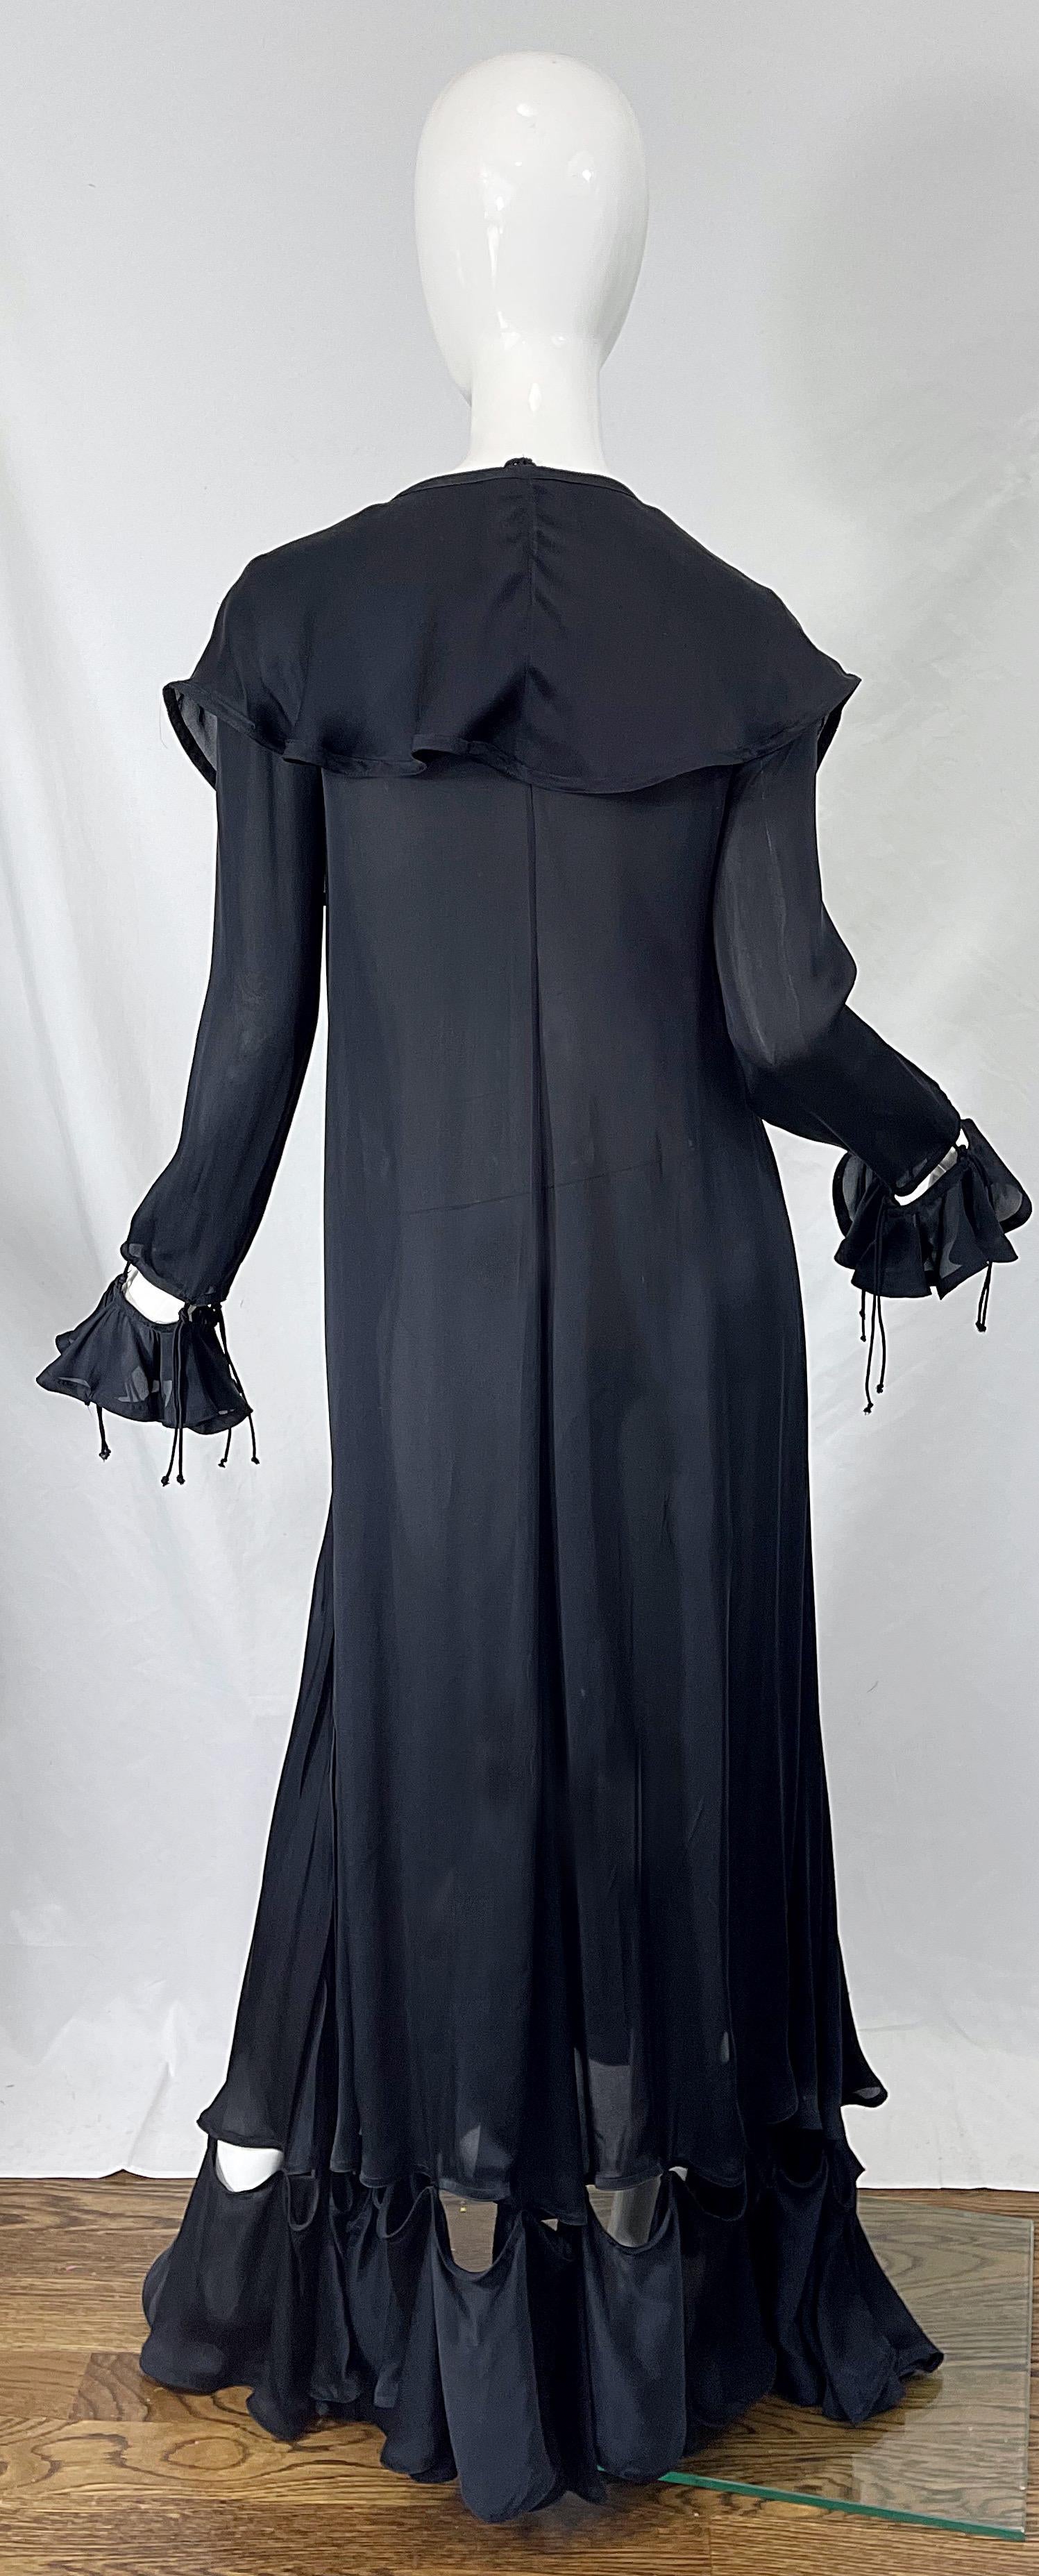 Yves Saint Laurent by Tom Ford Fall 2003 Runway Black Silk Chiffon Gown Size 38 For Sale 8